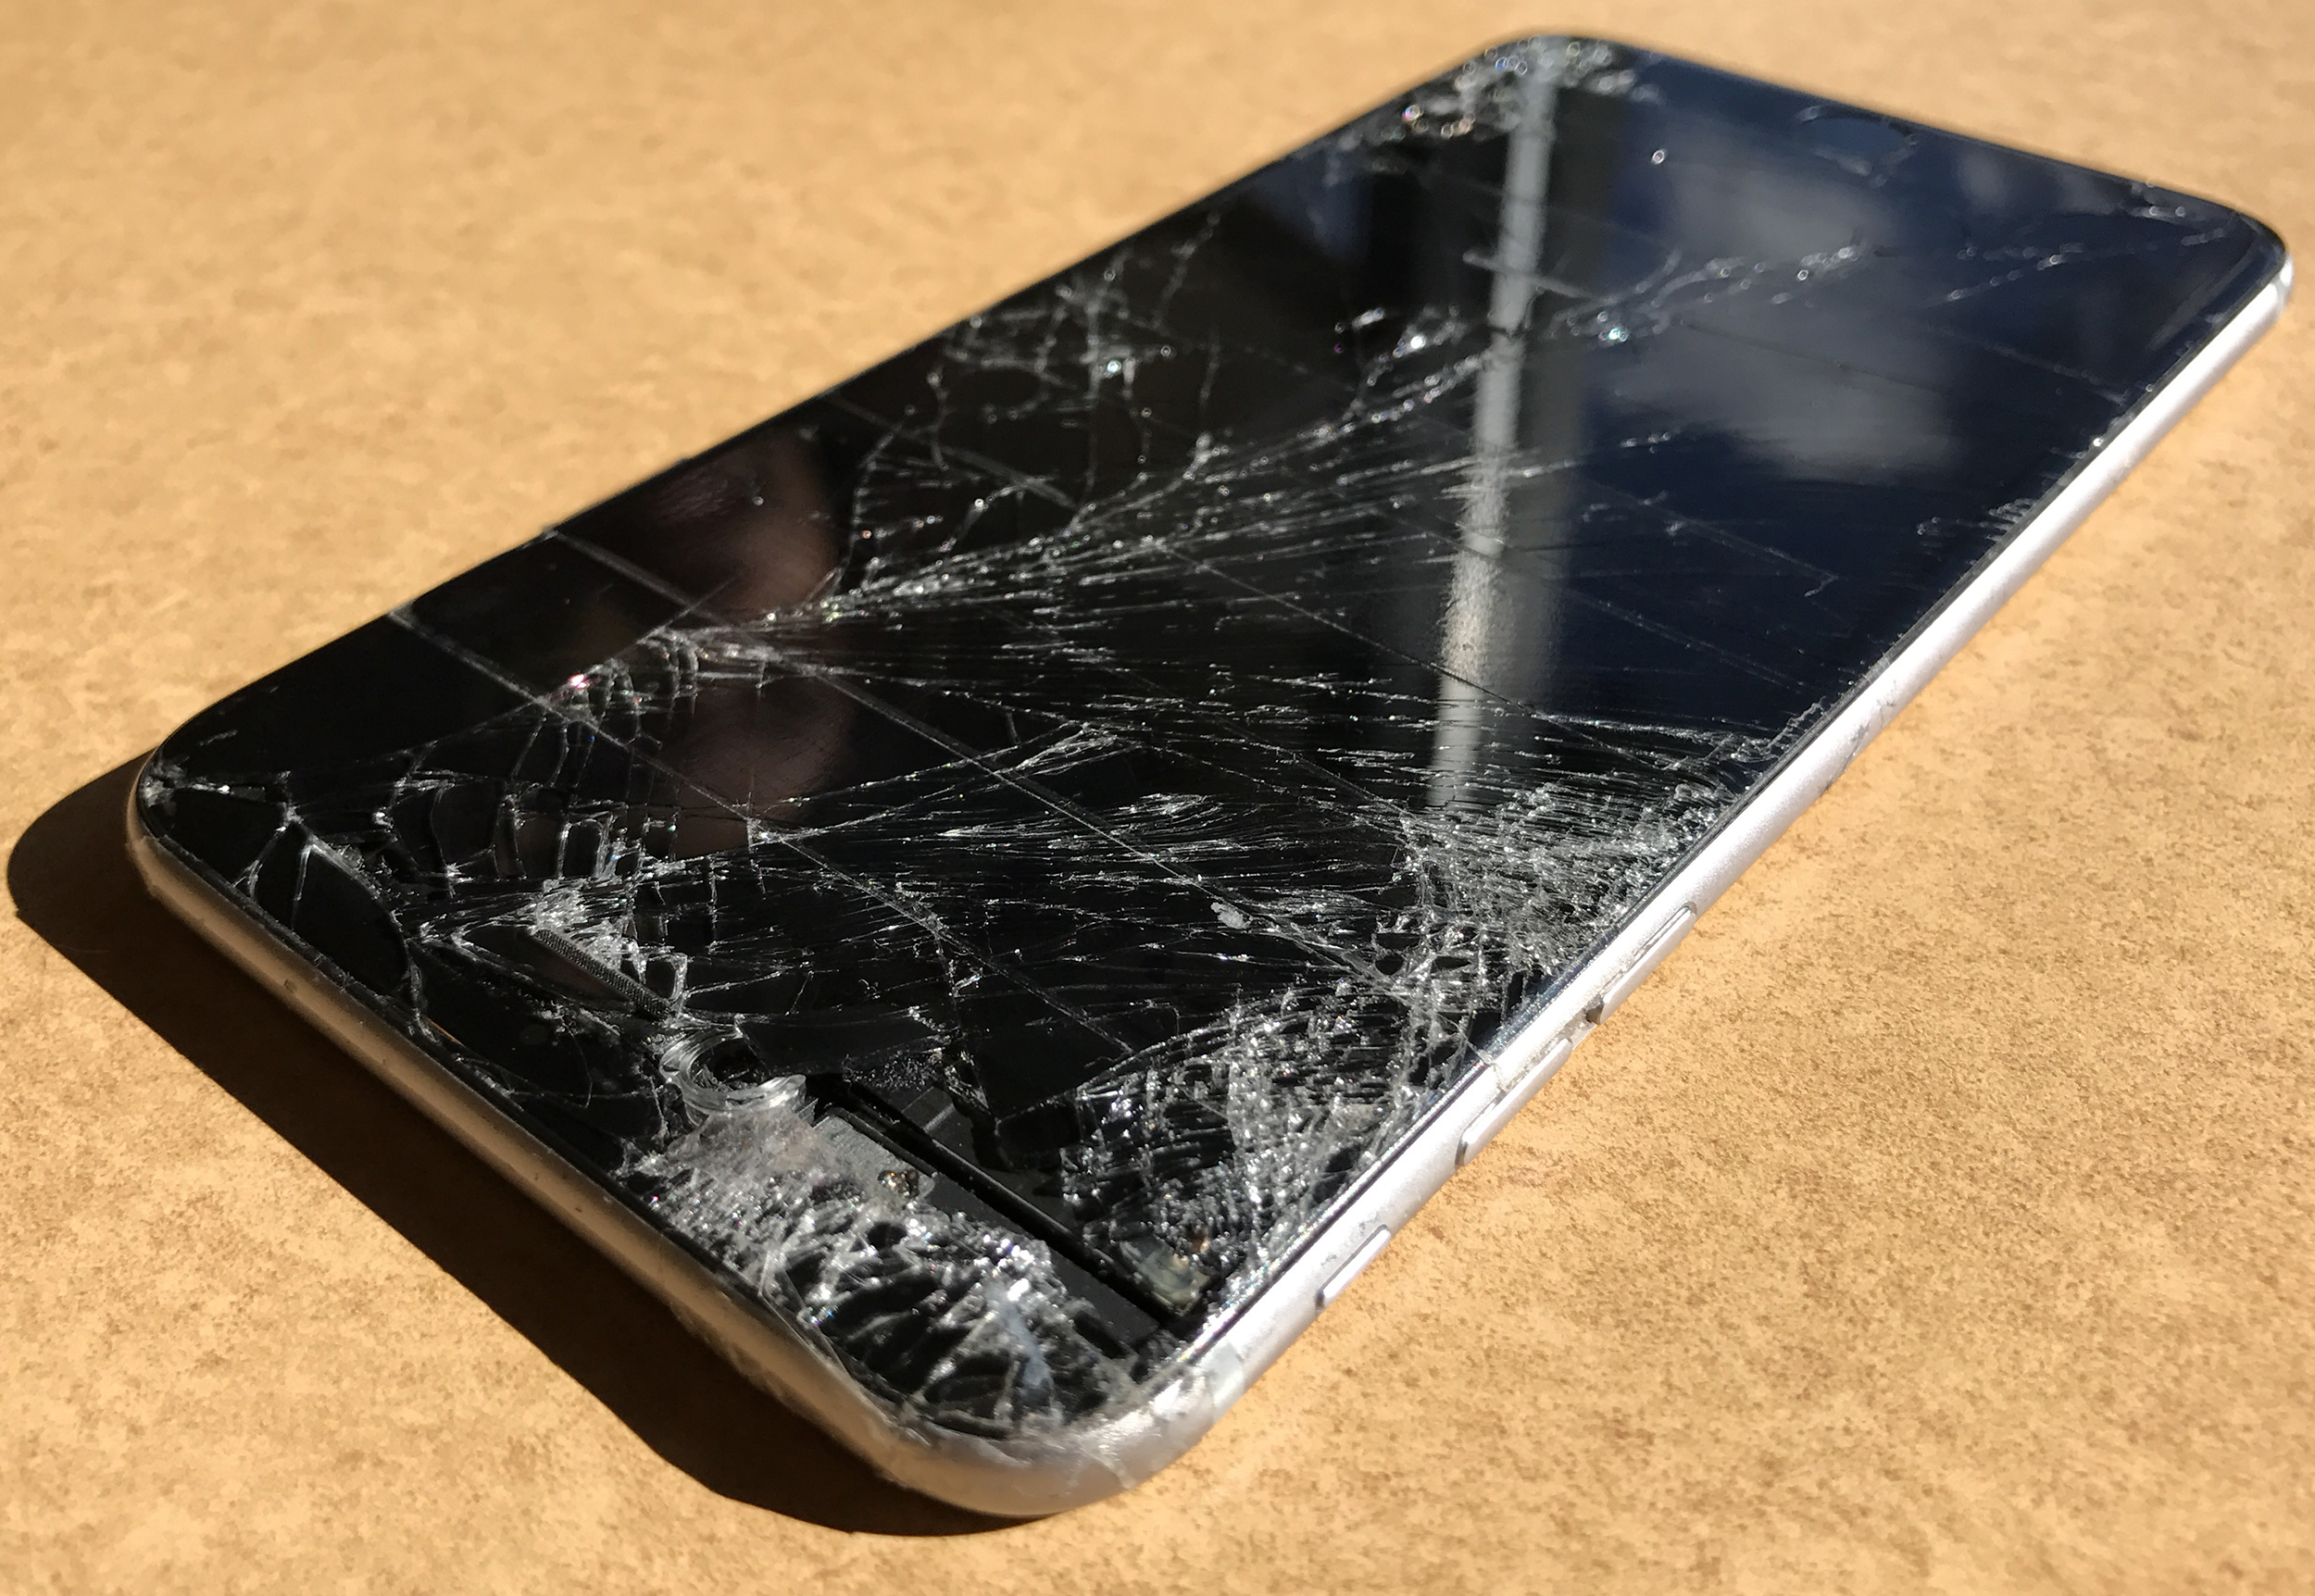 Broken iPhone 6S Plus Black Badly Cracked Glass Screen and Camera Damage